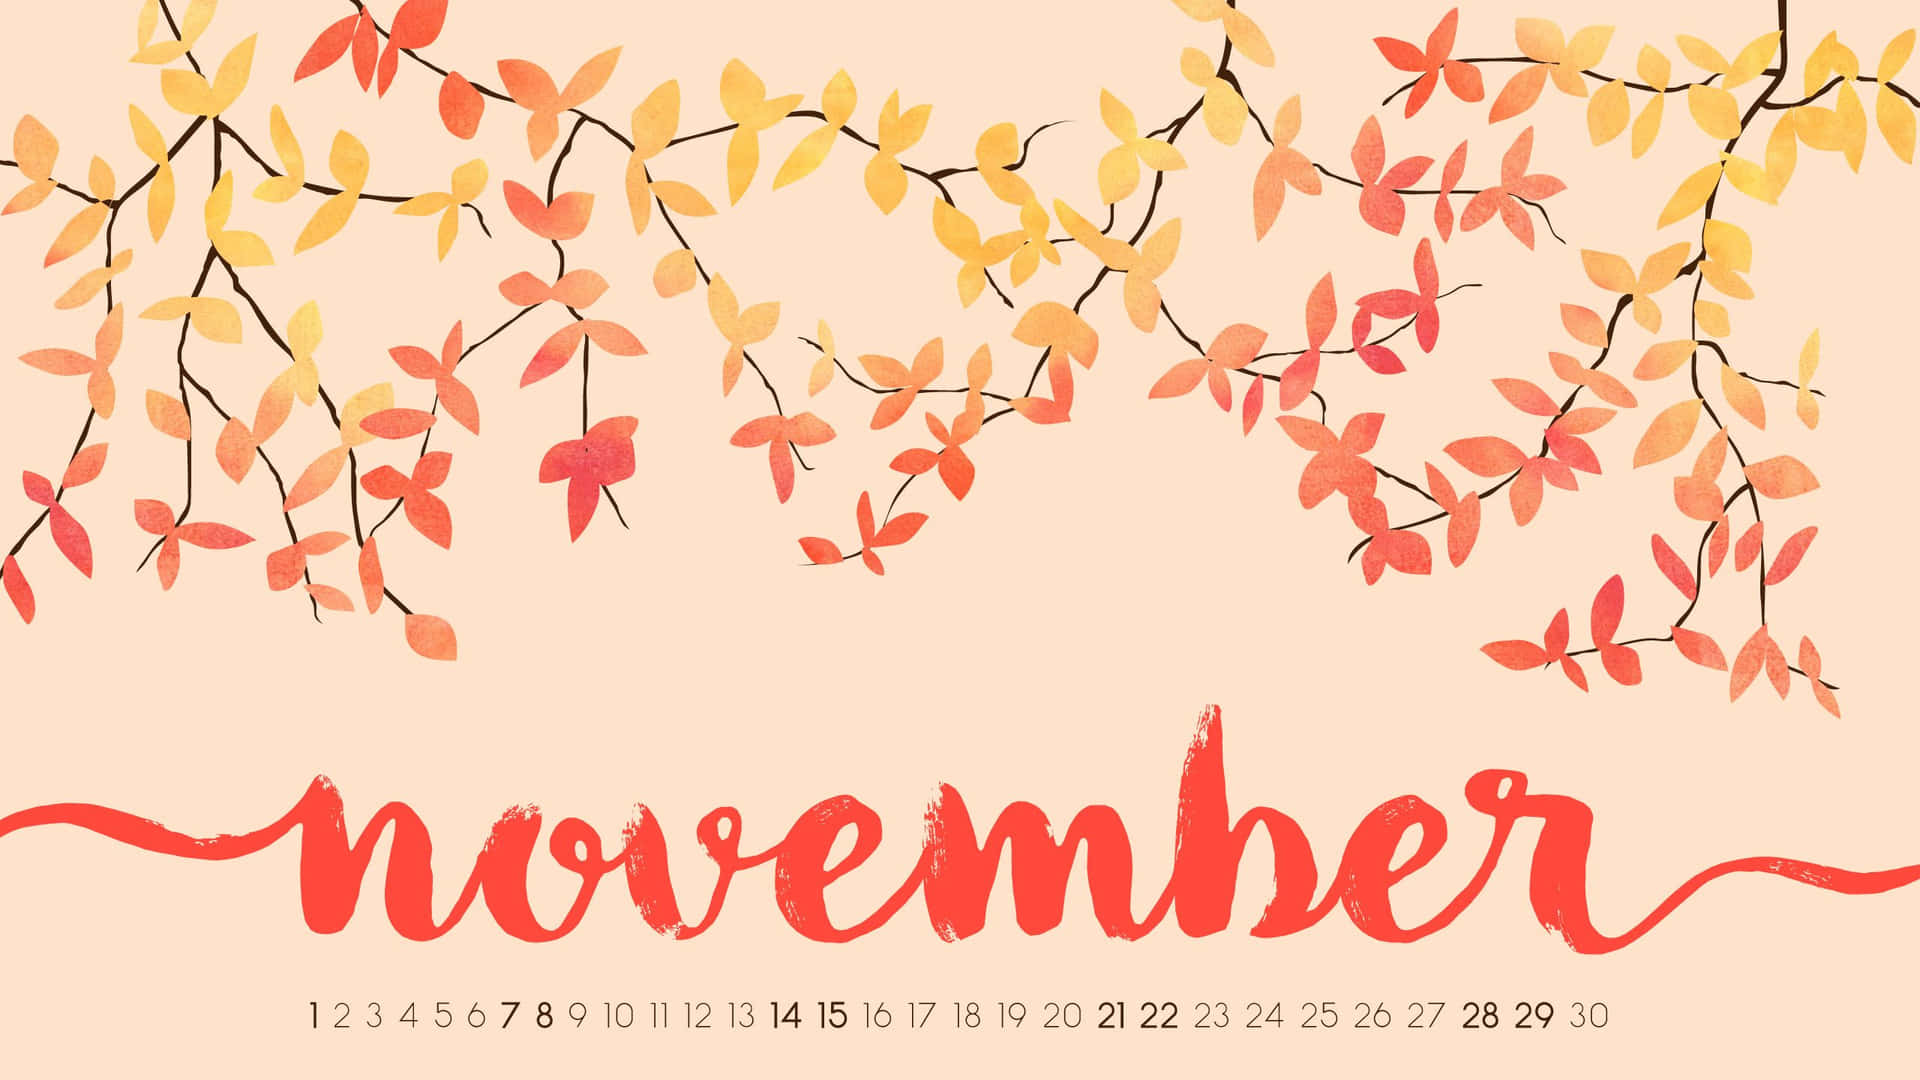 November Calendar With Leaves And Leaves Background